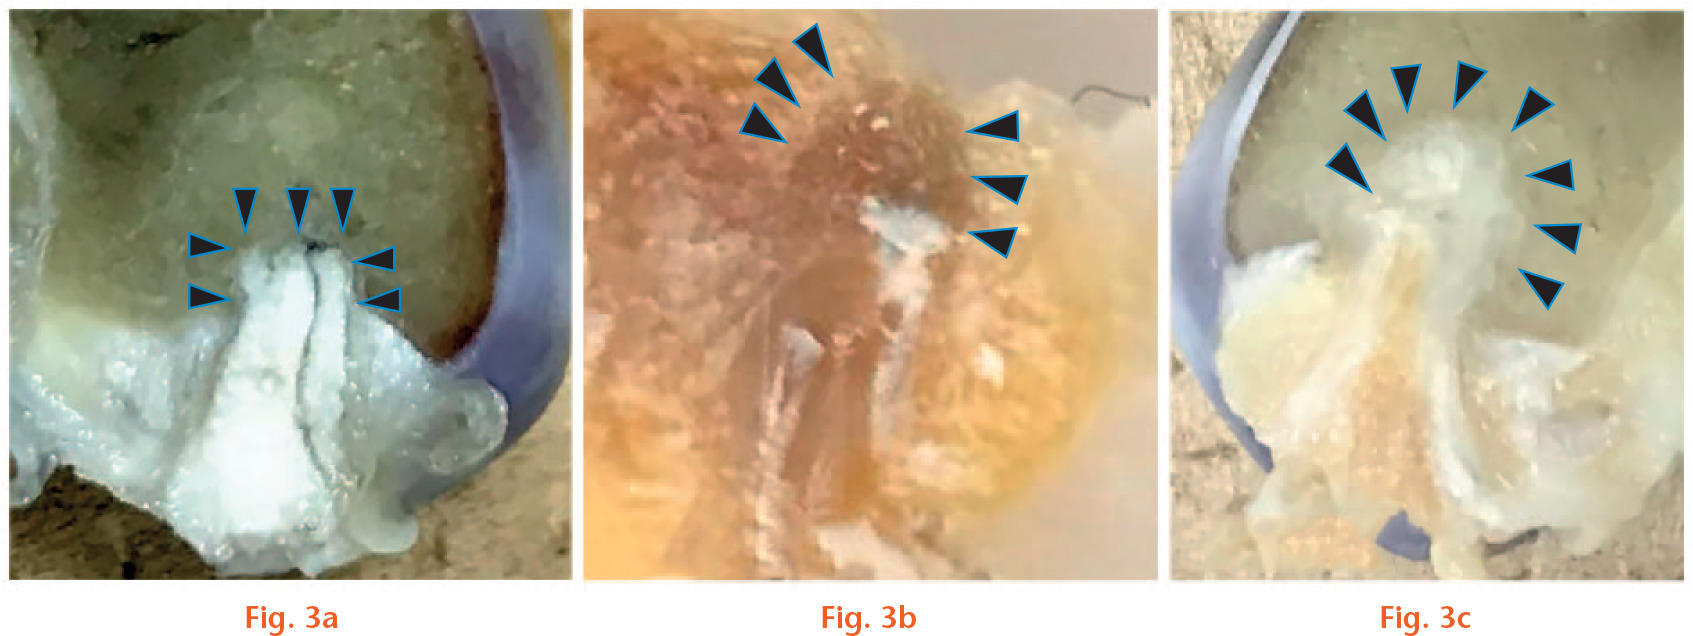  
            Sections along the tunnel axis after fixation in paraformaldehyde are shown (cut at the centre of the cross section of the graft): a) in the knees from the Socket group (right side), grafts were in close contact with the socket at both four and eight weeks. The graft end was quadrangular, fitting into the end of the socket; b) at four weeks, new bone formation in the tunnel above the graft end was observed, however, the boundary between the surrounding cancellous bone was clearly distinguishable; c) at eight weeks, the graft end in the Tunnel group was loop-shaped (semi-elliptical) at the time of insertion into the tunnel, and the newly formed bone was replaced with cancellous bone-like tissue which had integrated into the surrounding cancellous bone when the specimen was cut at the appropriate position. Arrowheads in (a), (b) and (c) indicate the contour of the tendon/bone interface.
          